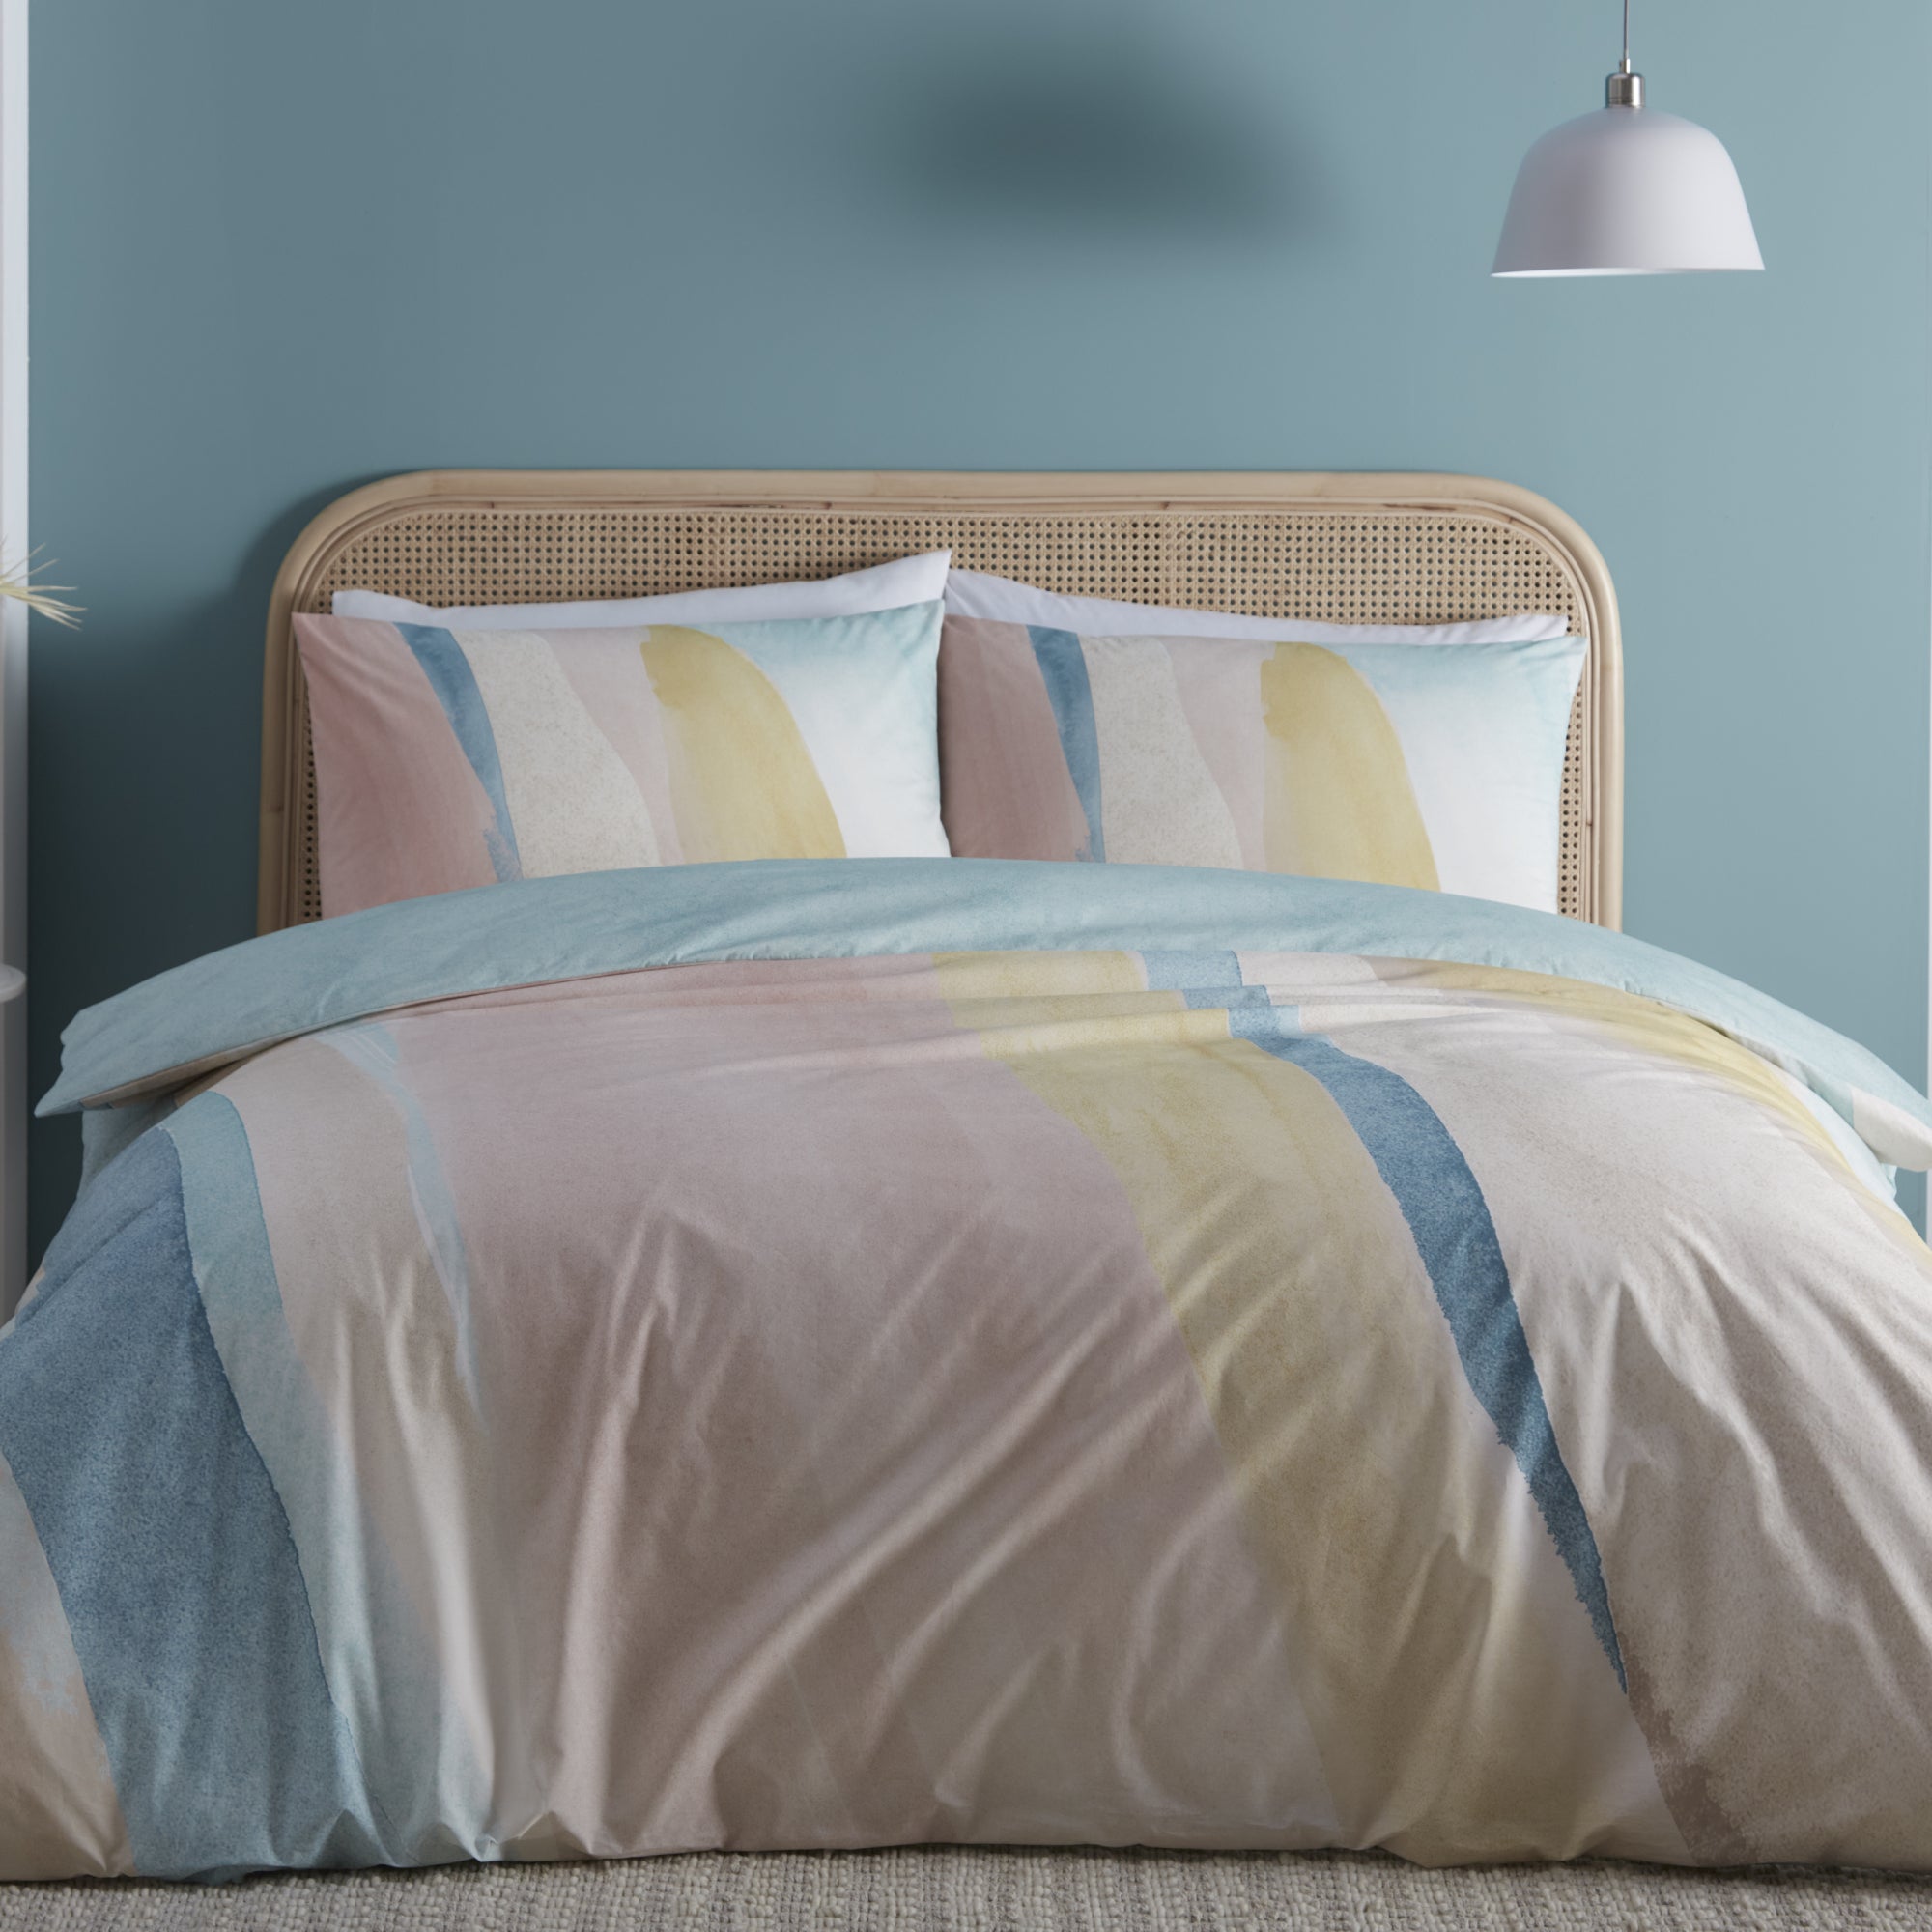 Duvet Cover Set Peyton by Appletree Style in Coral